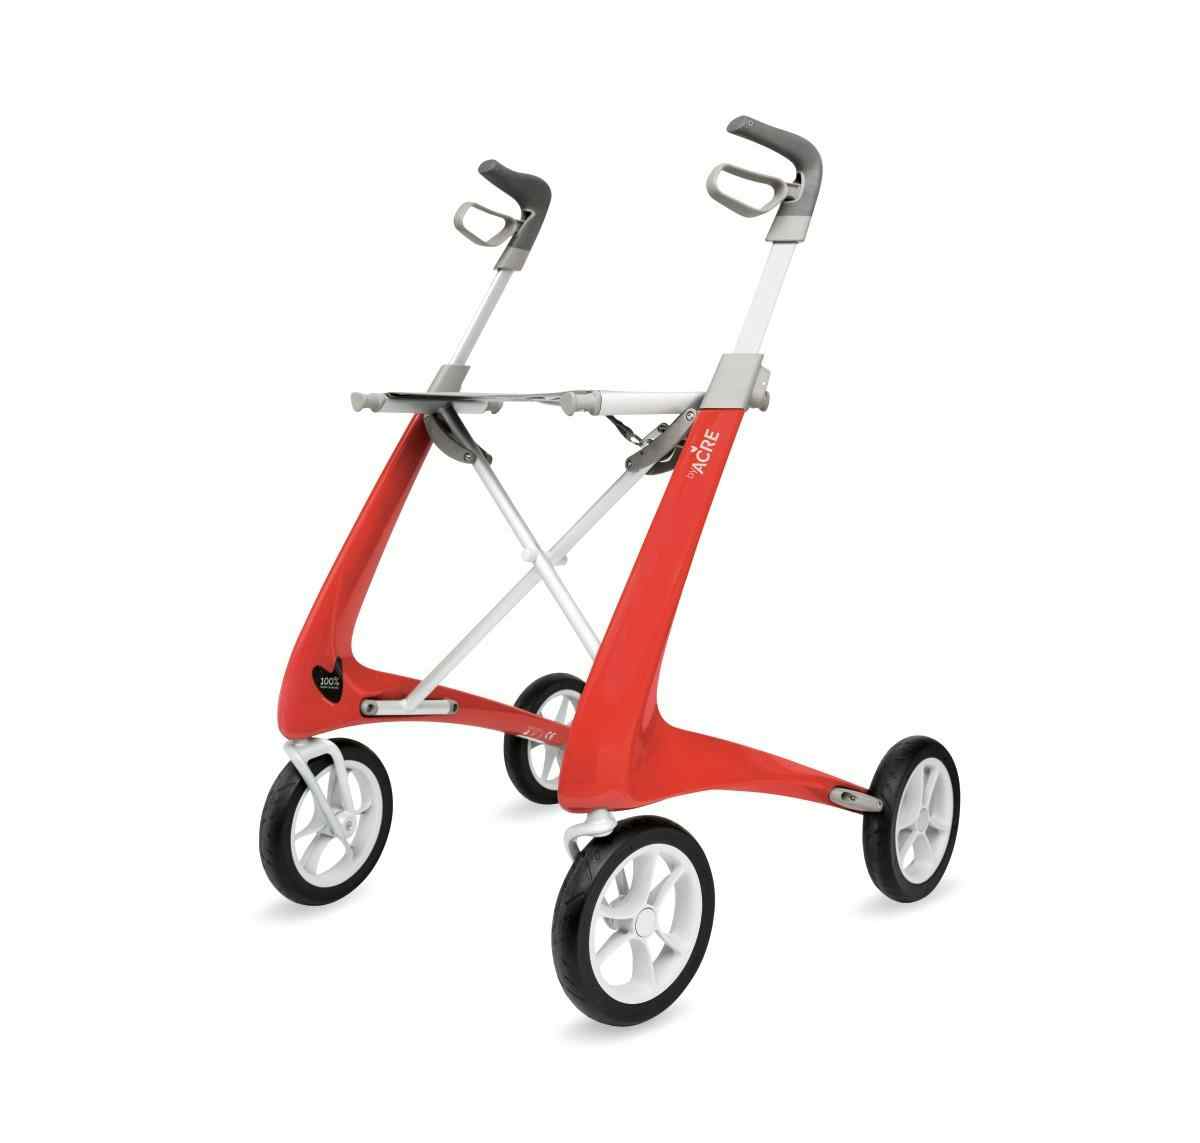 Carbon Fiber Rollator, 16.1" W X 22" H Compact Seat, BYA100SMR, Red - 1 Each